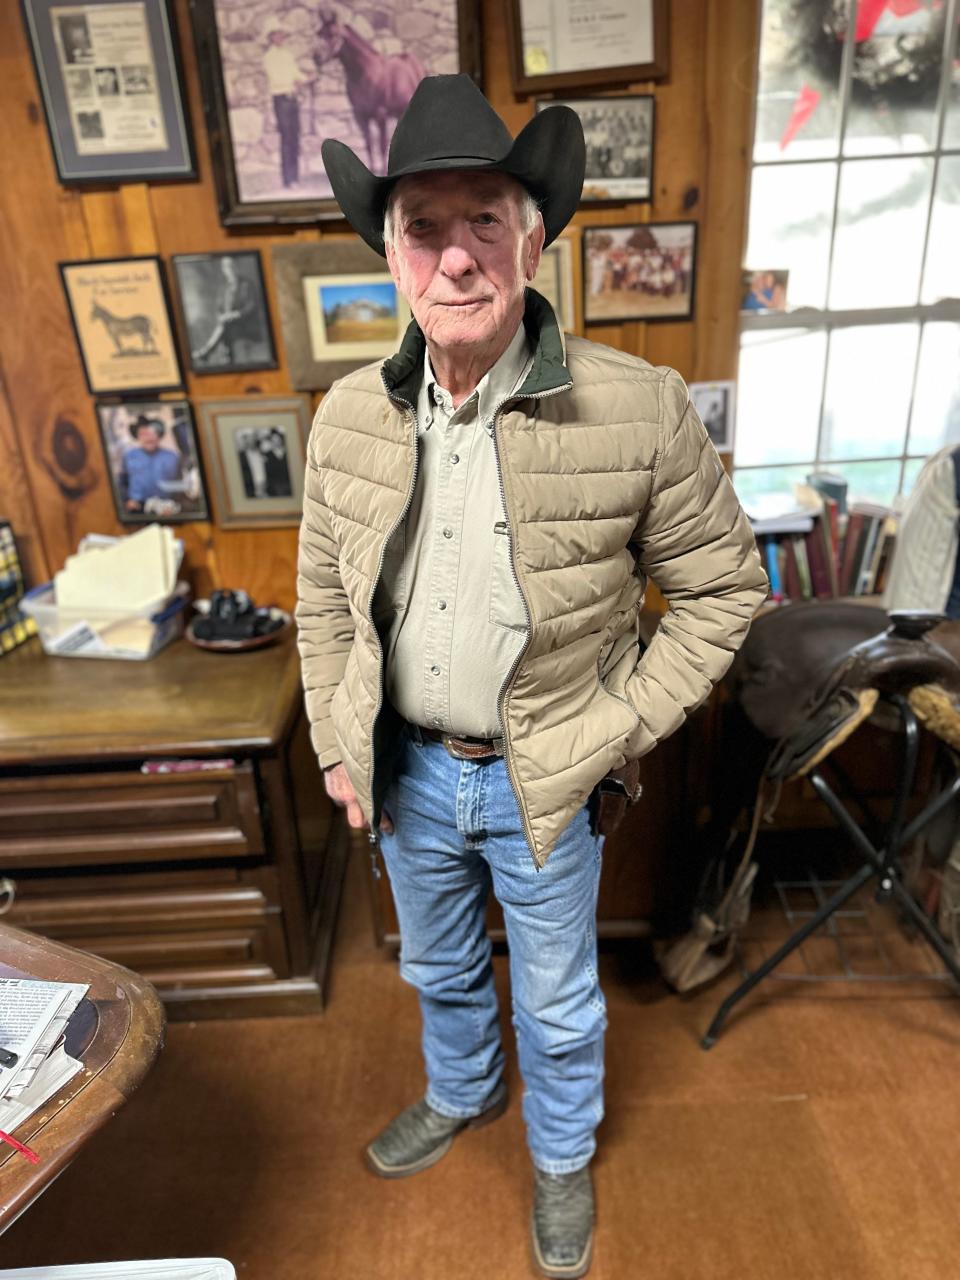 Bobby Melton stands in front of the wall of his office covered in autographed photos, his grandfather's horse selling license from 1920, and photos of him and his family showing their Quarter horses